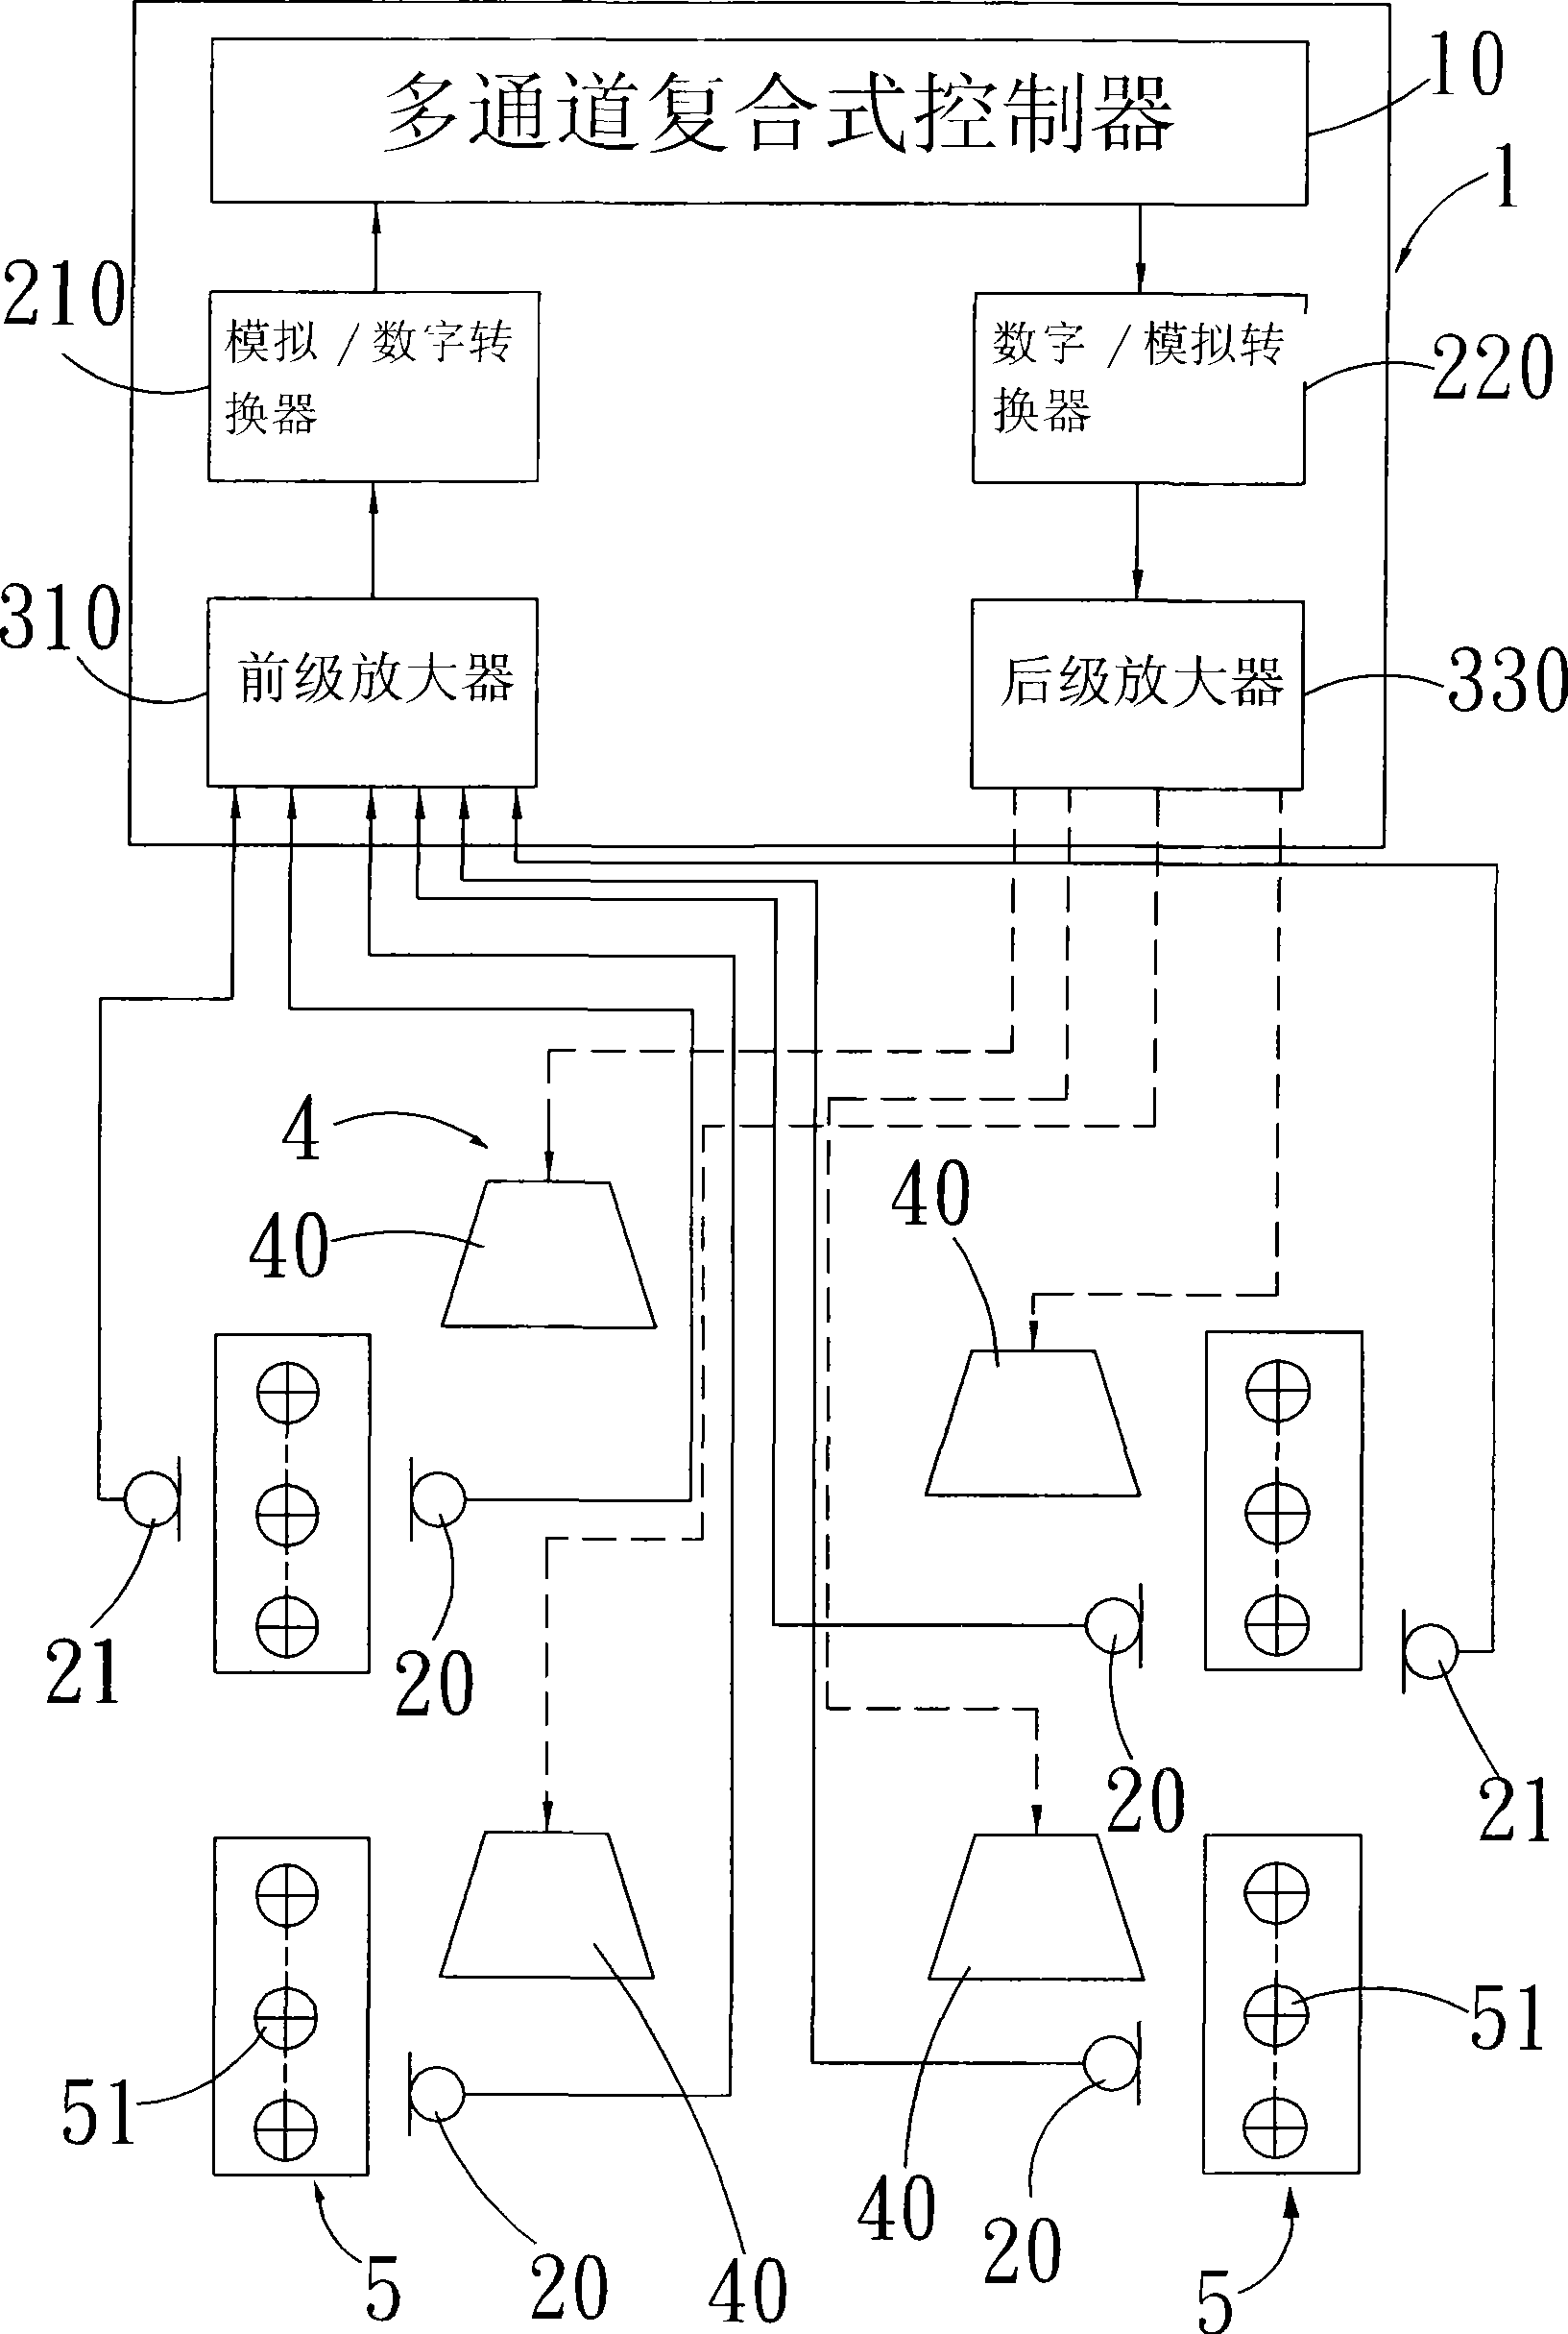 Wideband noise suppressing system for communication machine room